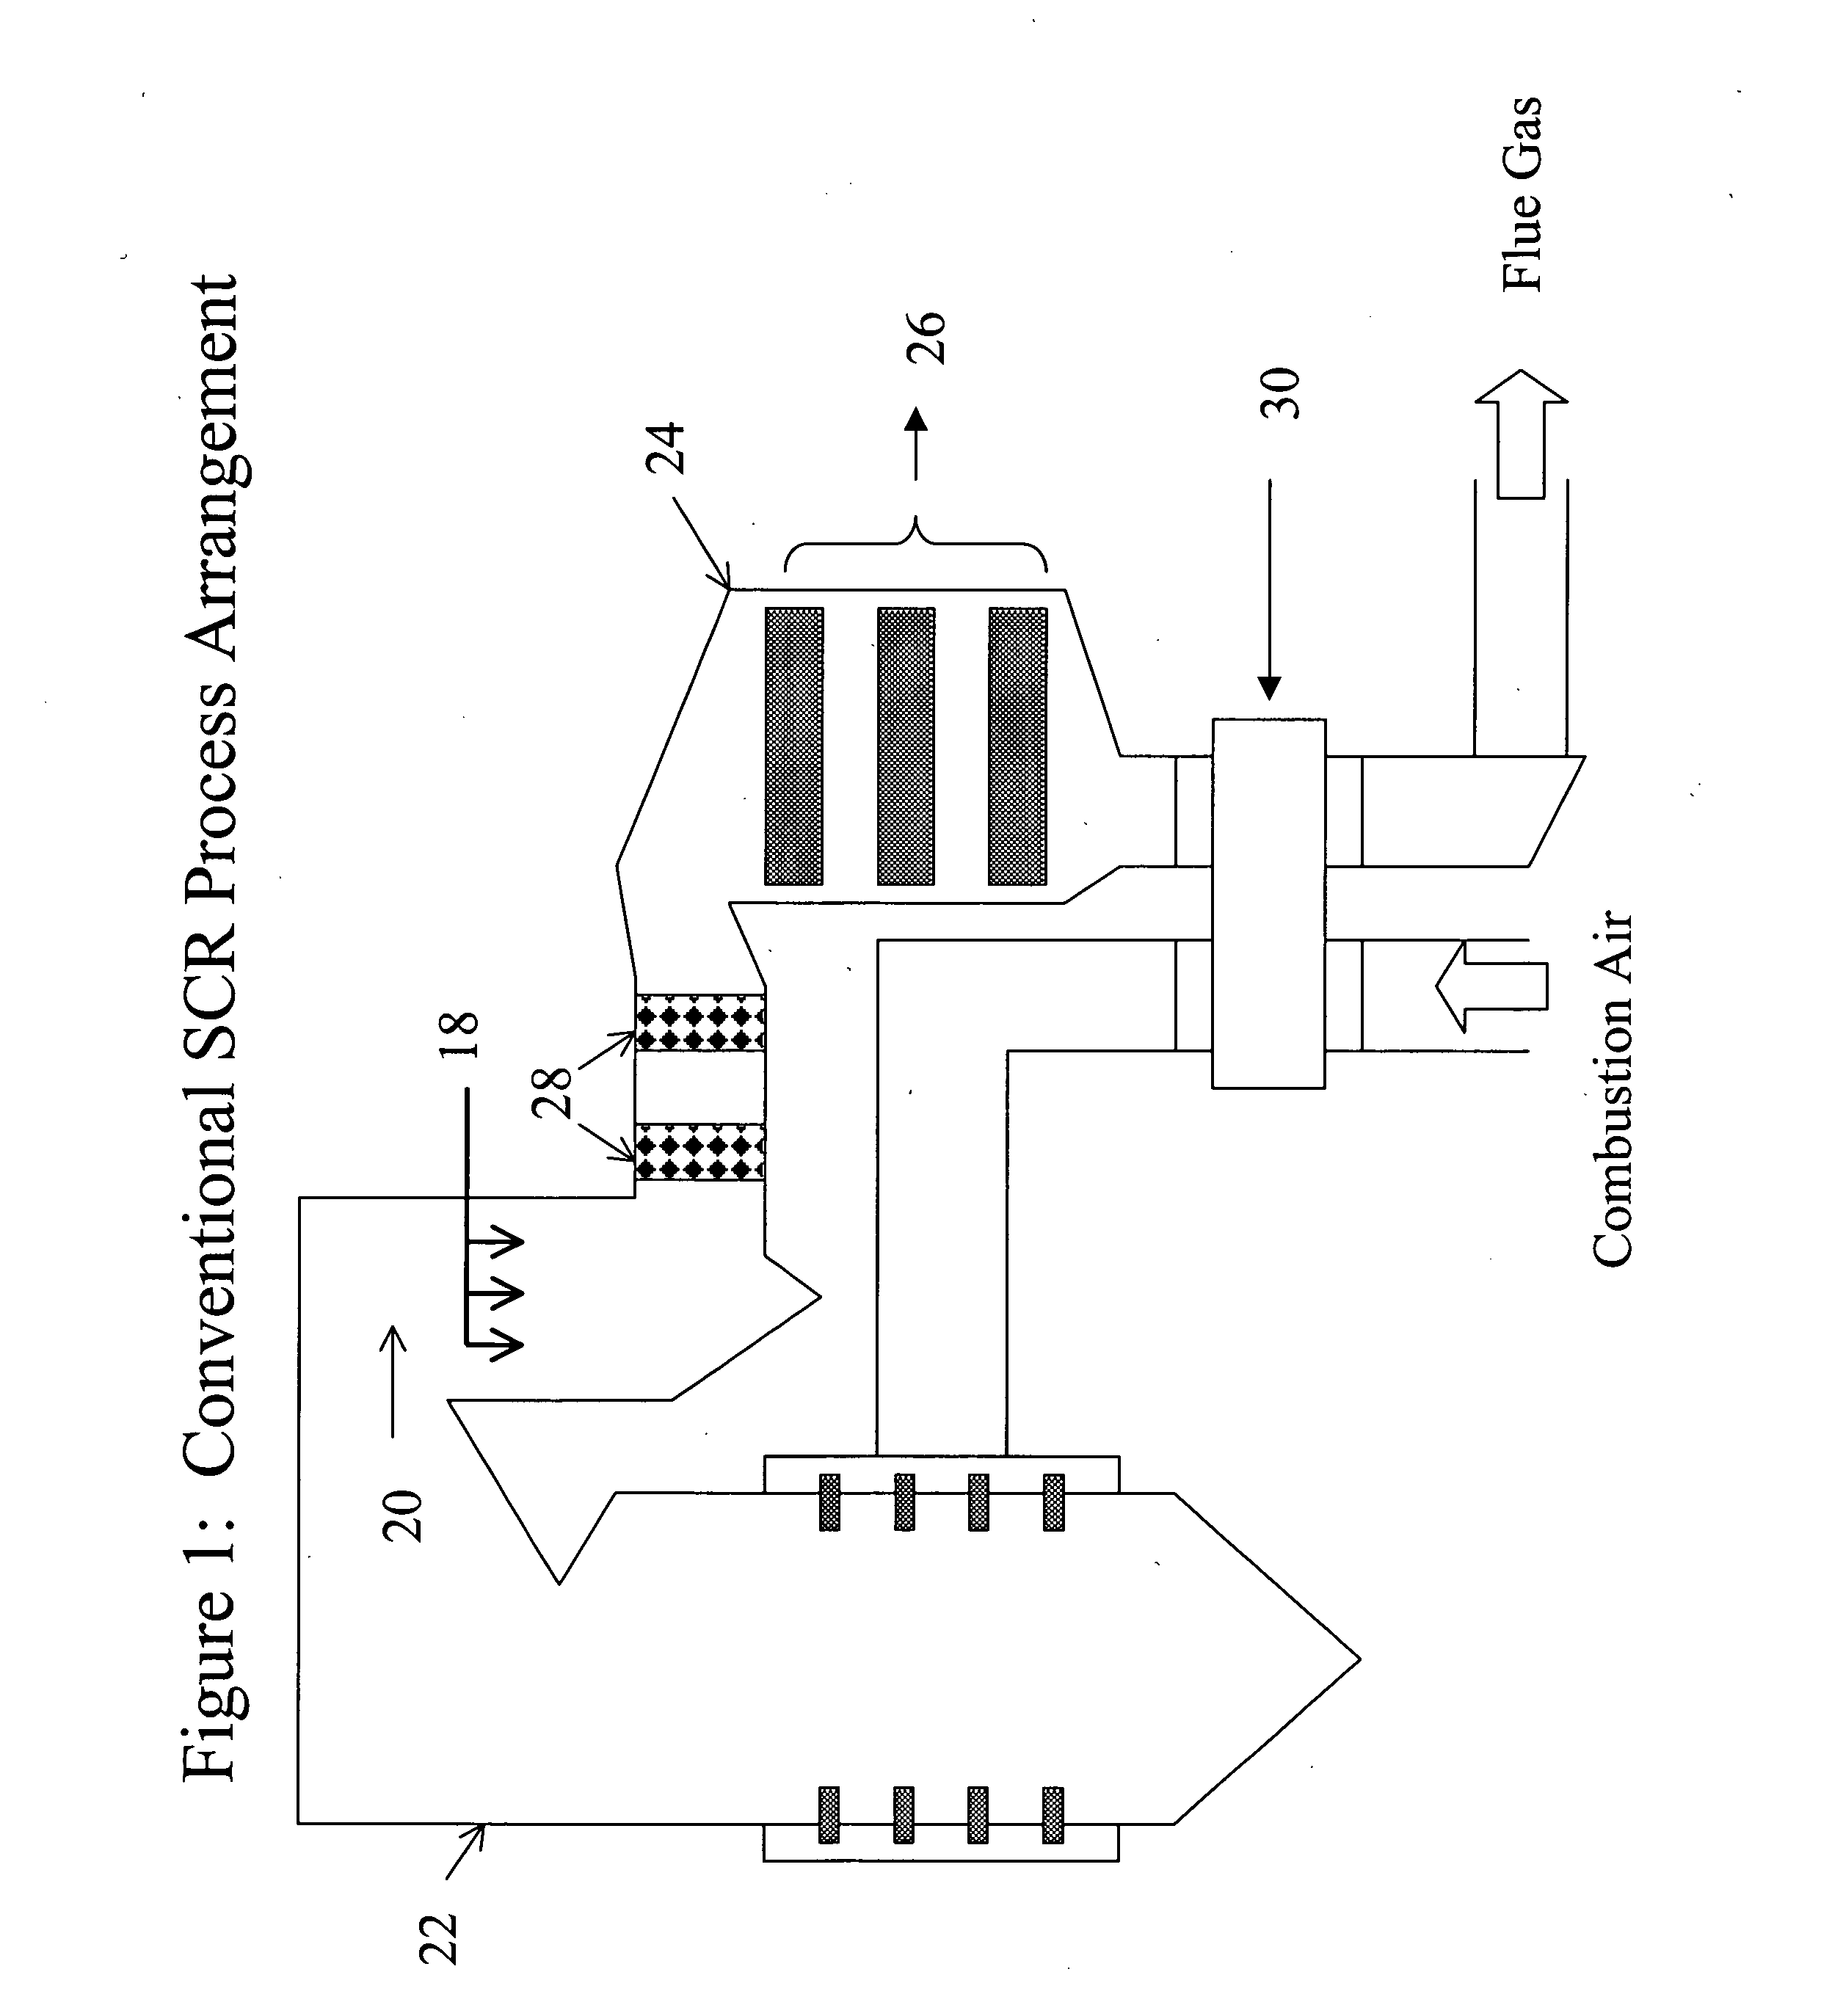 Multi-stage heat absorbing reactor and process for SCR of NOx and for oxidation of elemental mercury